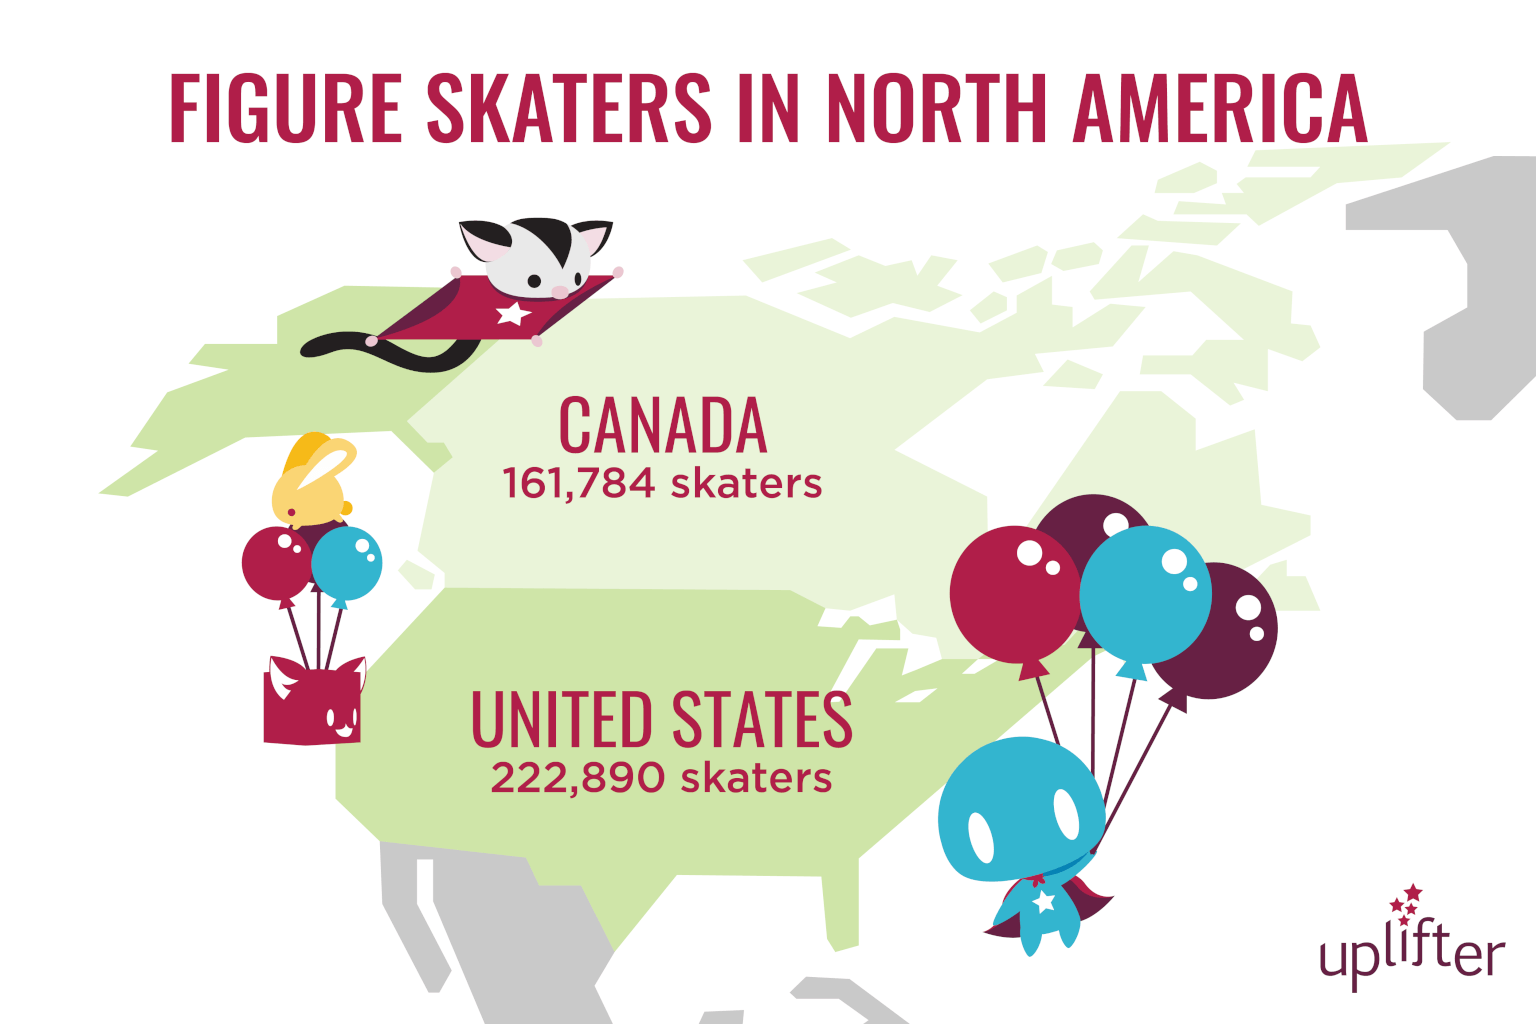 How many figure skaters are in North America